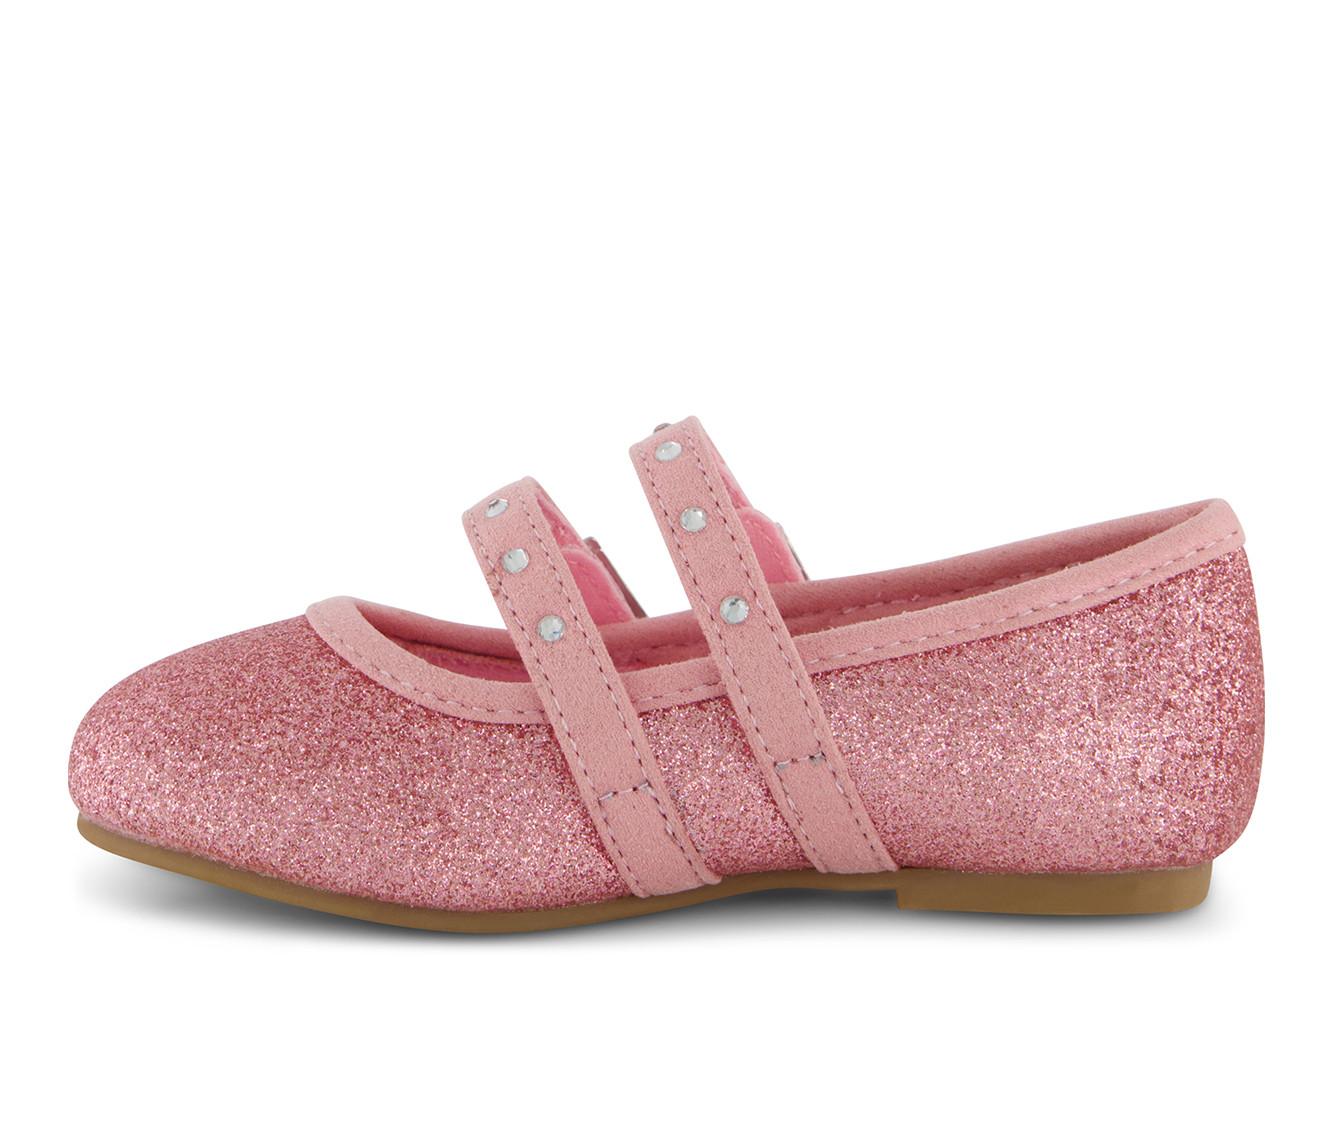 Girls' Jessica Simpson Toddler Amy Doublestrap Flats